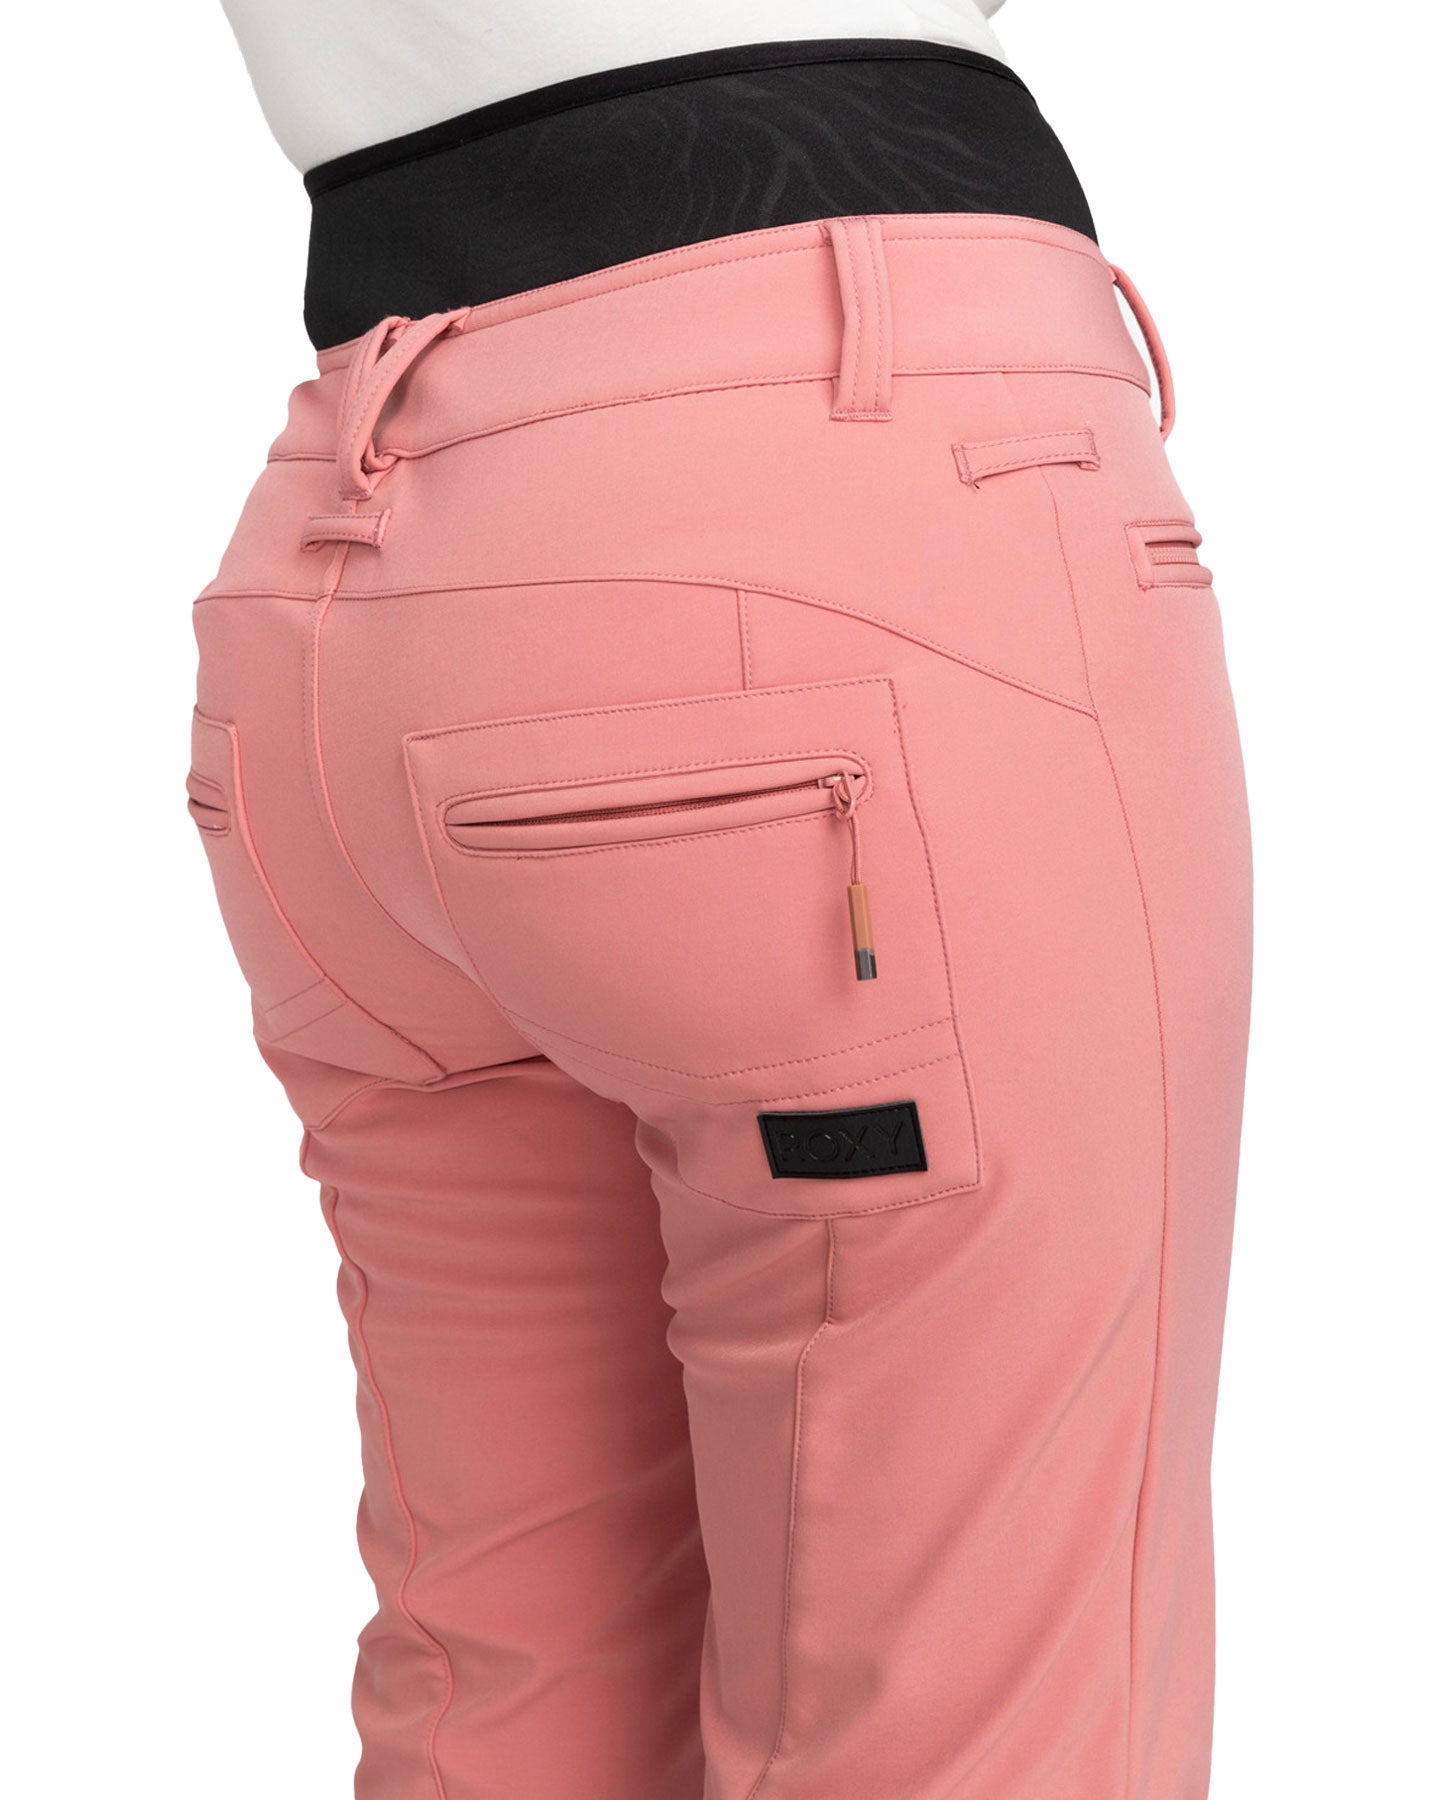 Roxy Womens Rising High Technical Snow Pants - Dusty Rose